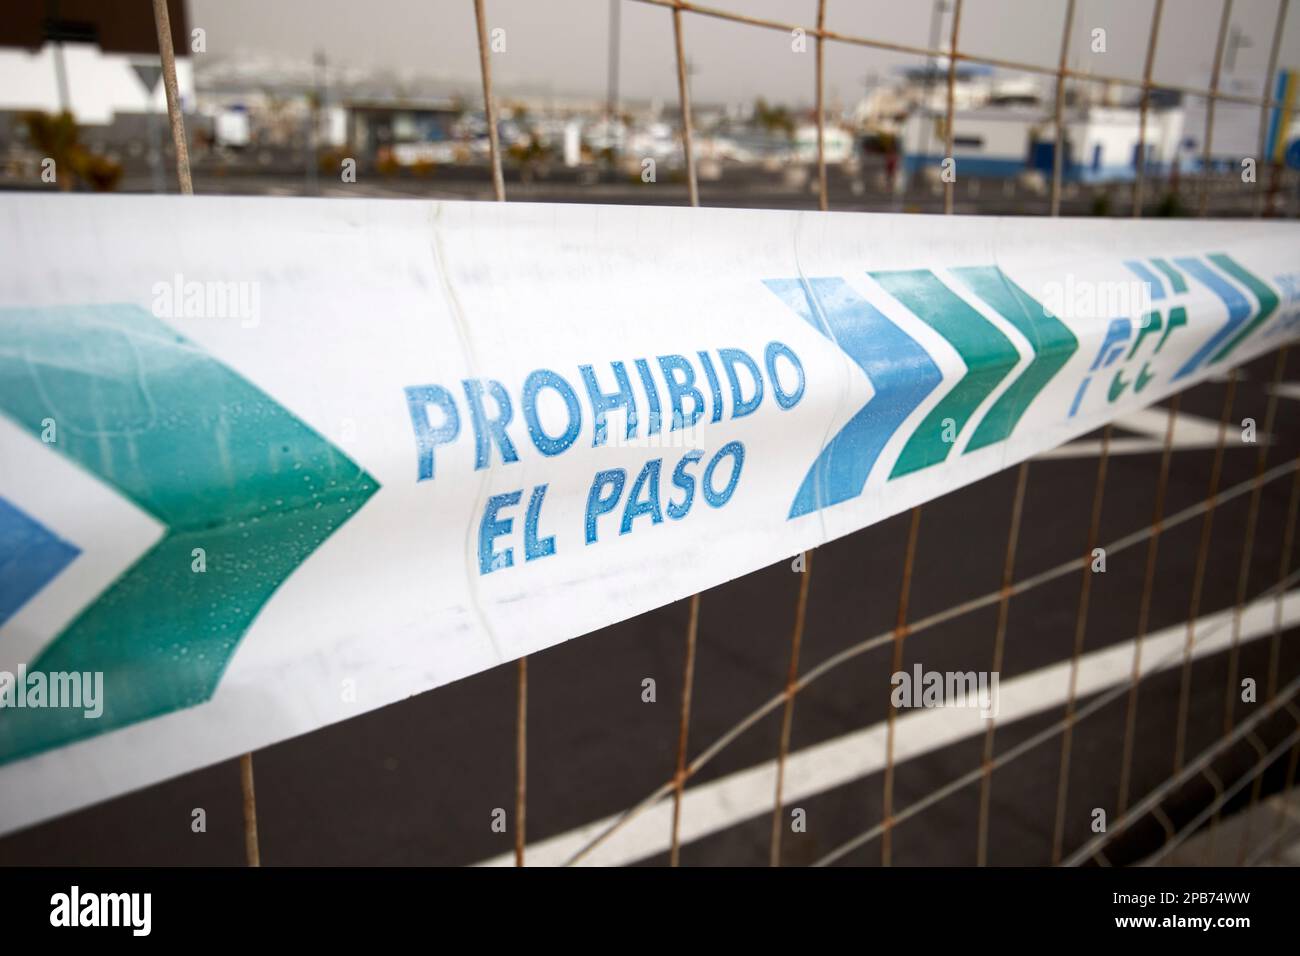 fcc prohibido el paso no entry barrier tape on fence in Lanzarote, Canary Islands, Spain Stock Photo